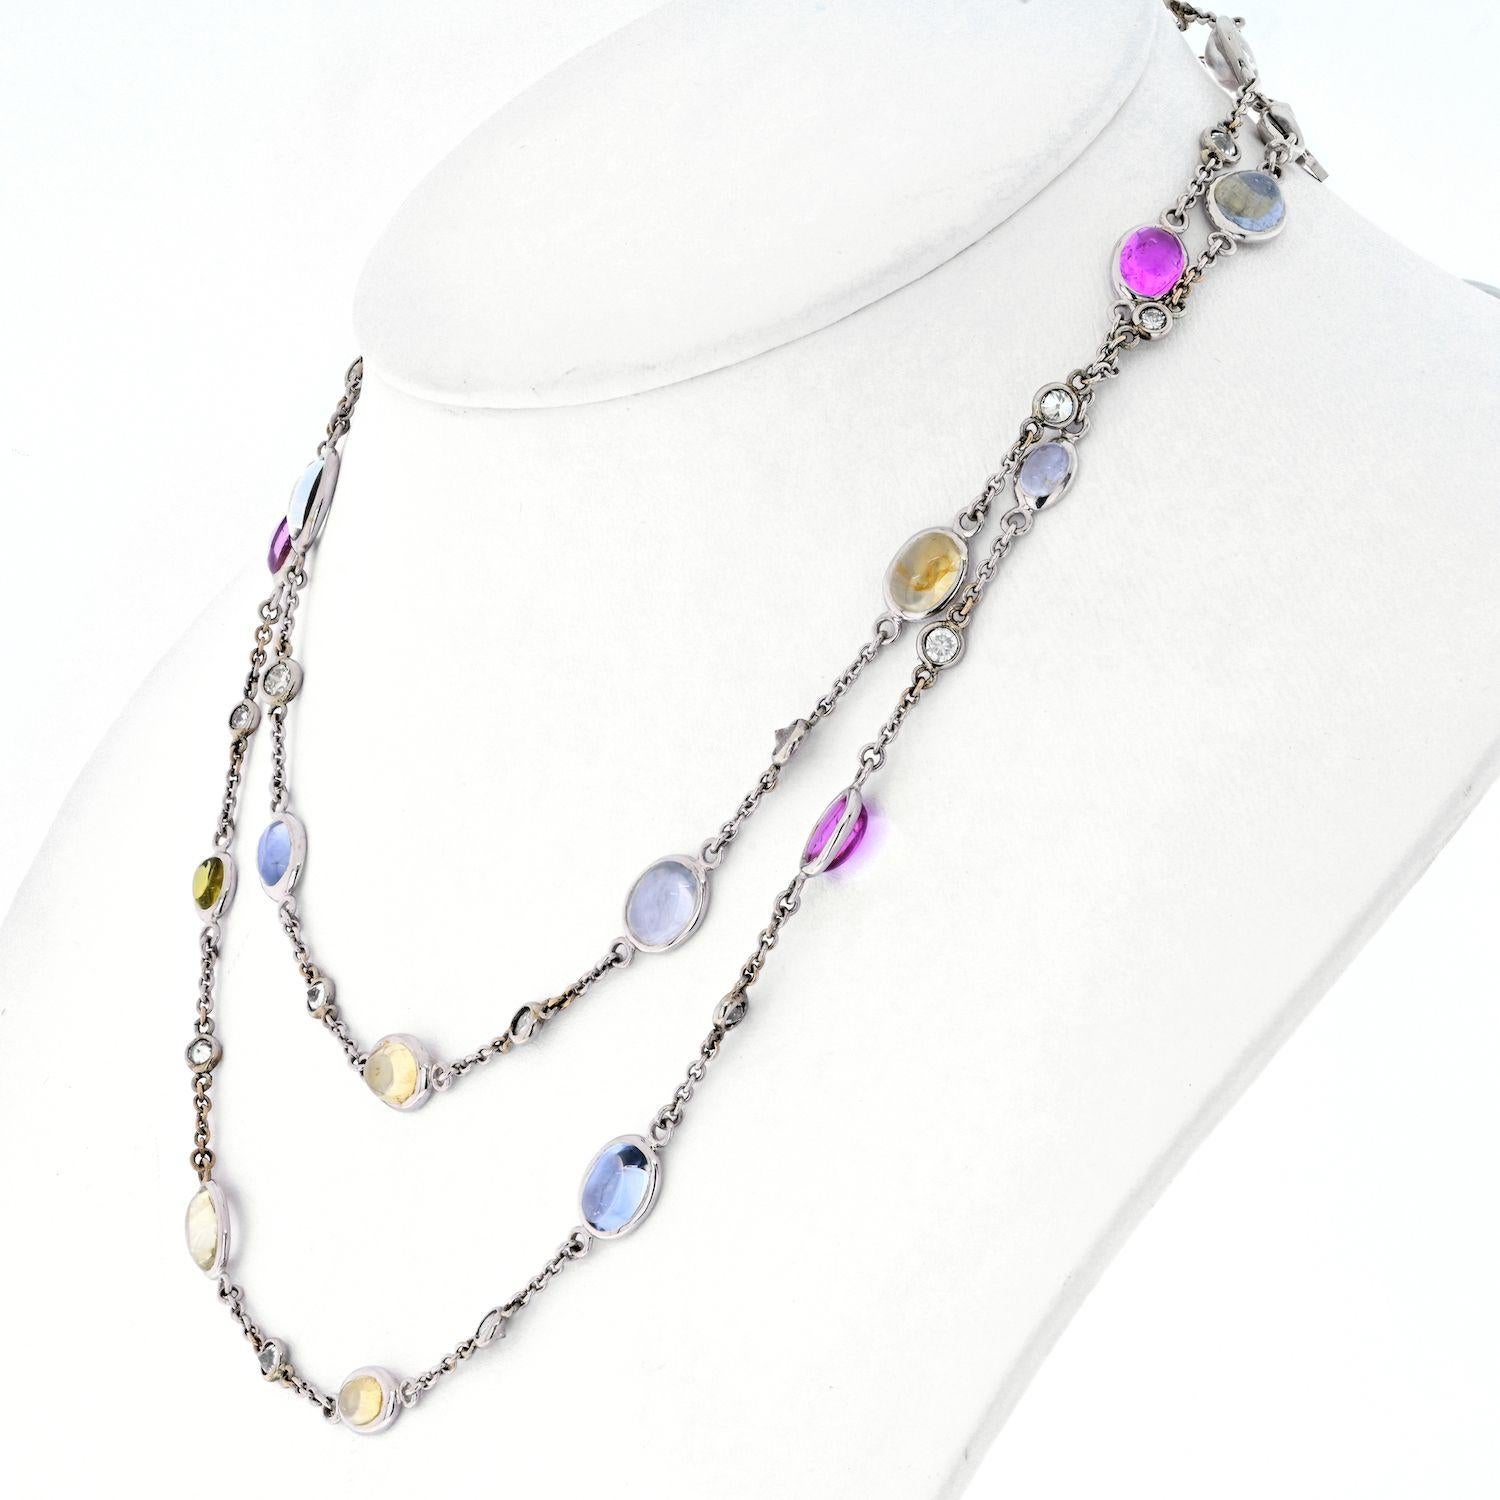 This effortlessly chic, ready-to-wear necklace by Bvlgari features gemstones and diamonds. 
From the Parentesi collection this chain necklace is of fine Italian quality.
This modern diamond and gemstone white gold chain will bring movement and